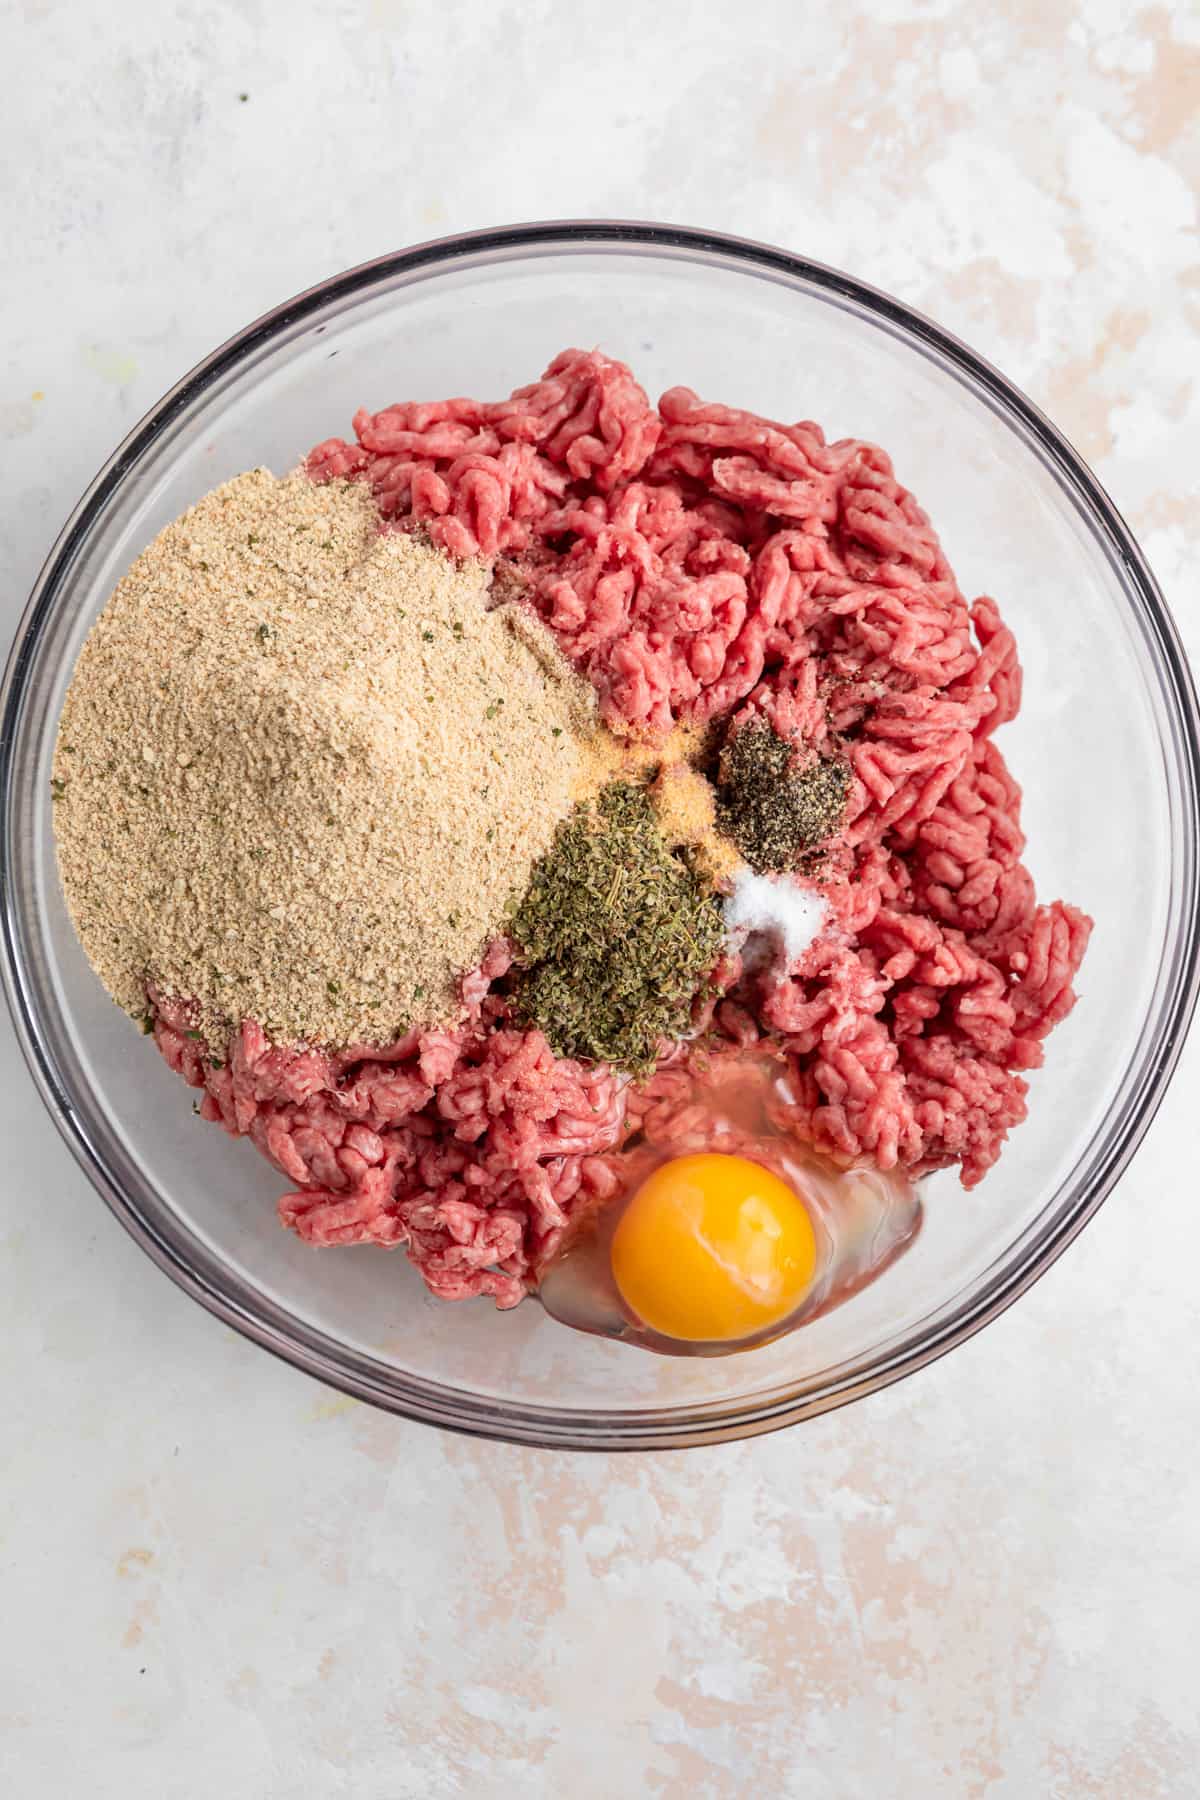 Glass bowl with ground beef, breadcrumbs, egg, seasoning and salt and pepper.